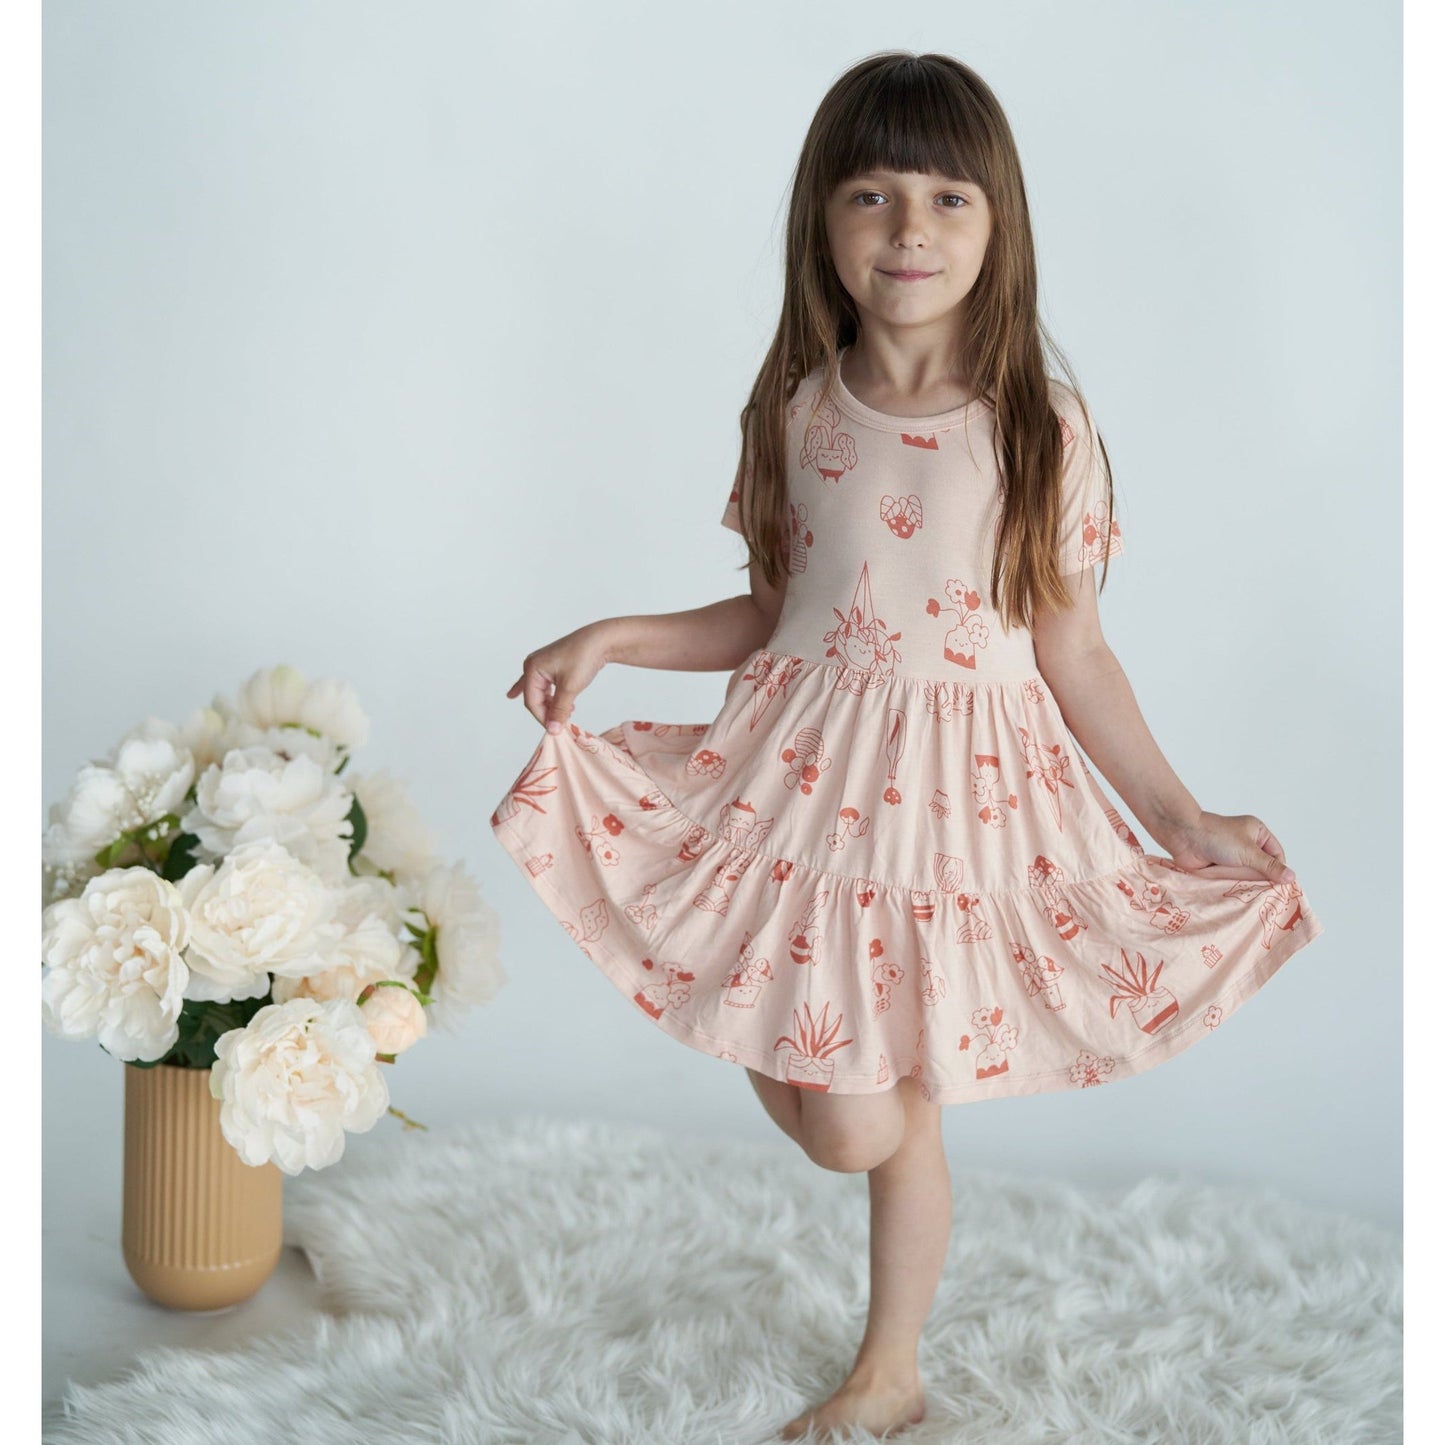 Bamboo Tiered Jersey Dress with Bloomer (Plantastic Print)